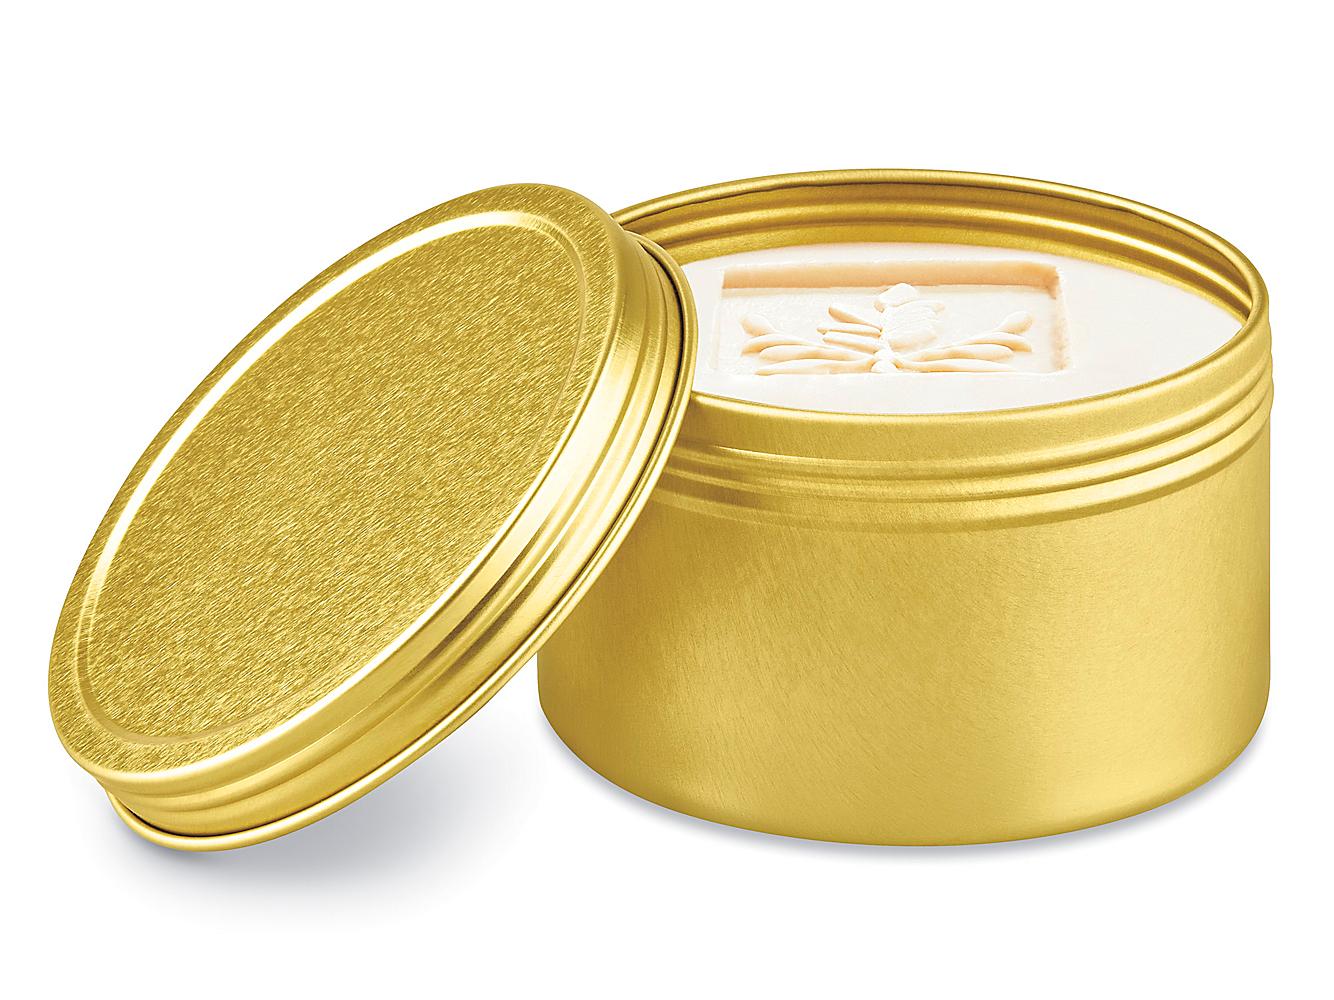 Gold Metal Tins  Specialty Bottle